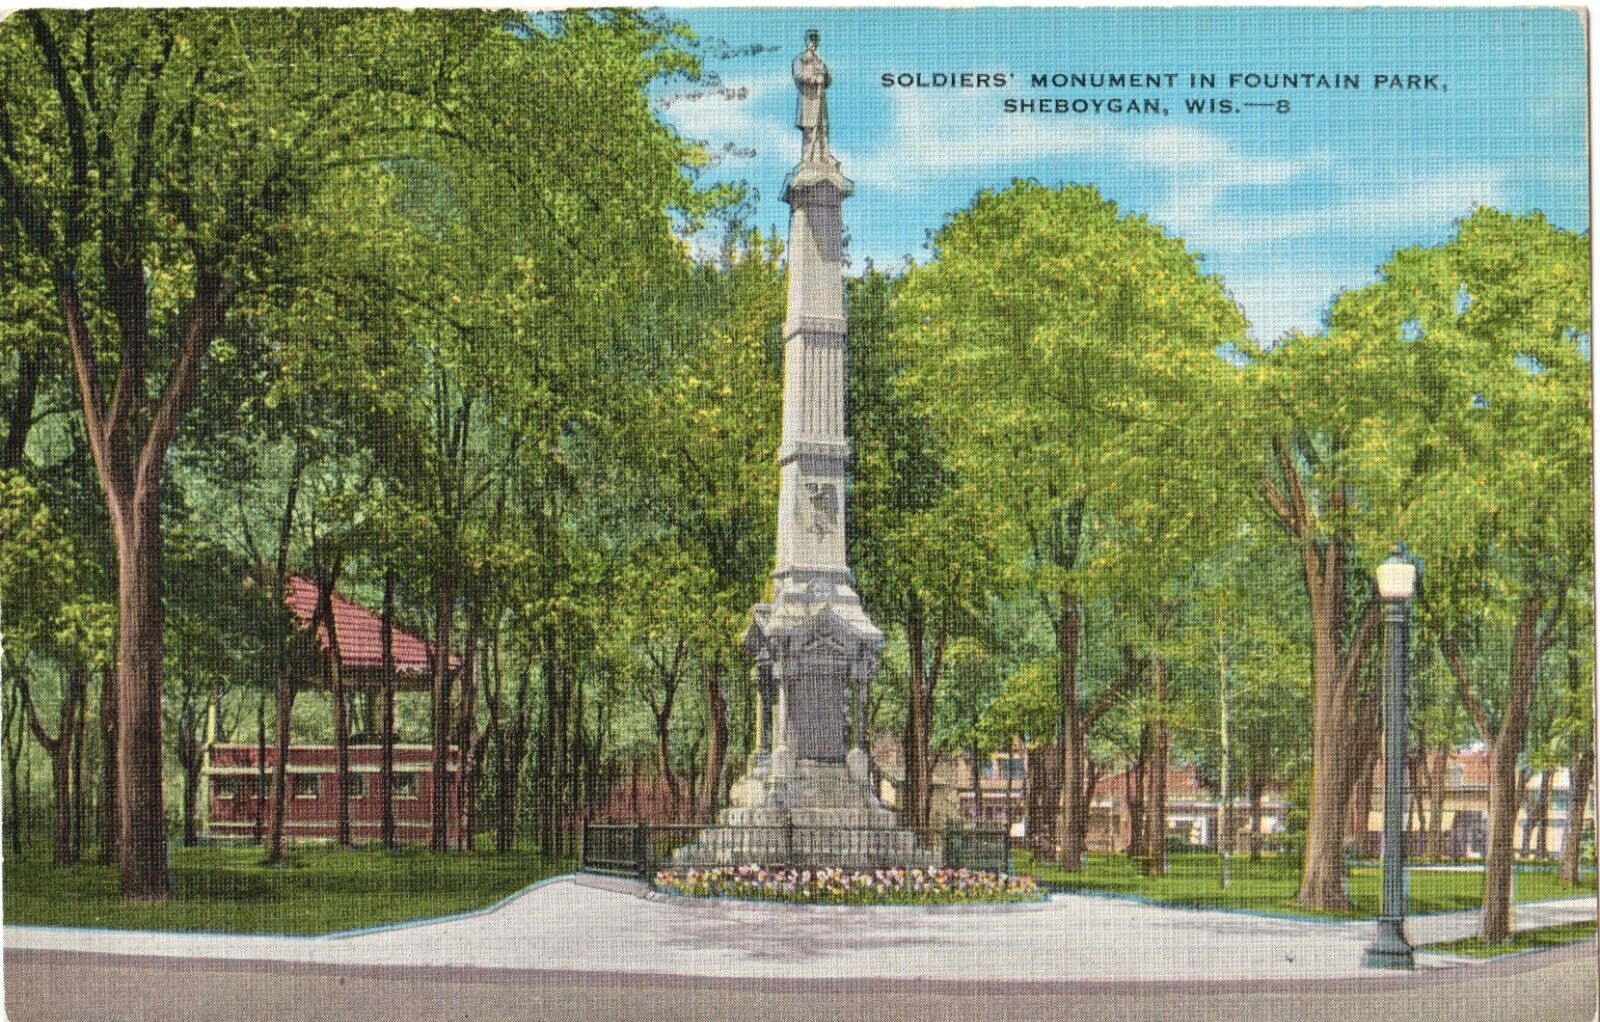 Soldiers' Monument in Fountain Park-Sheboygan, Wisconsin WI antique linen 1946